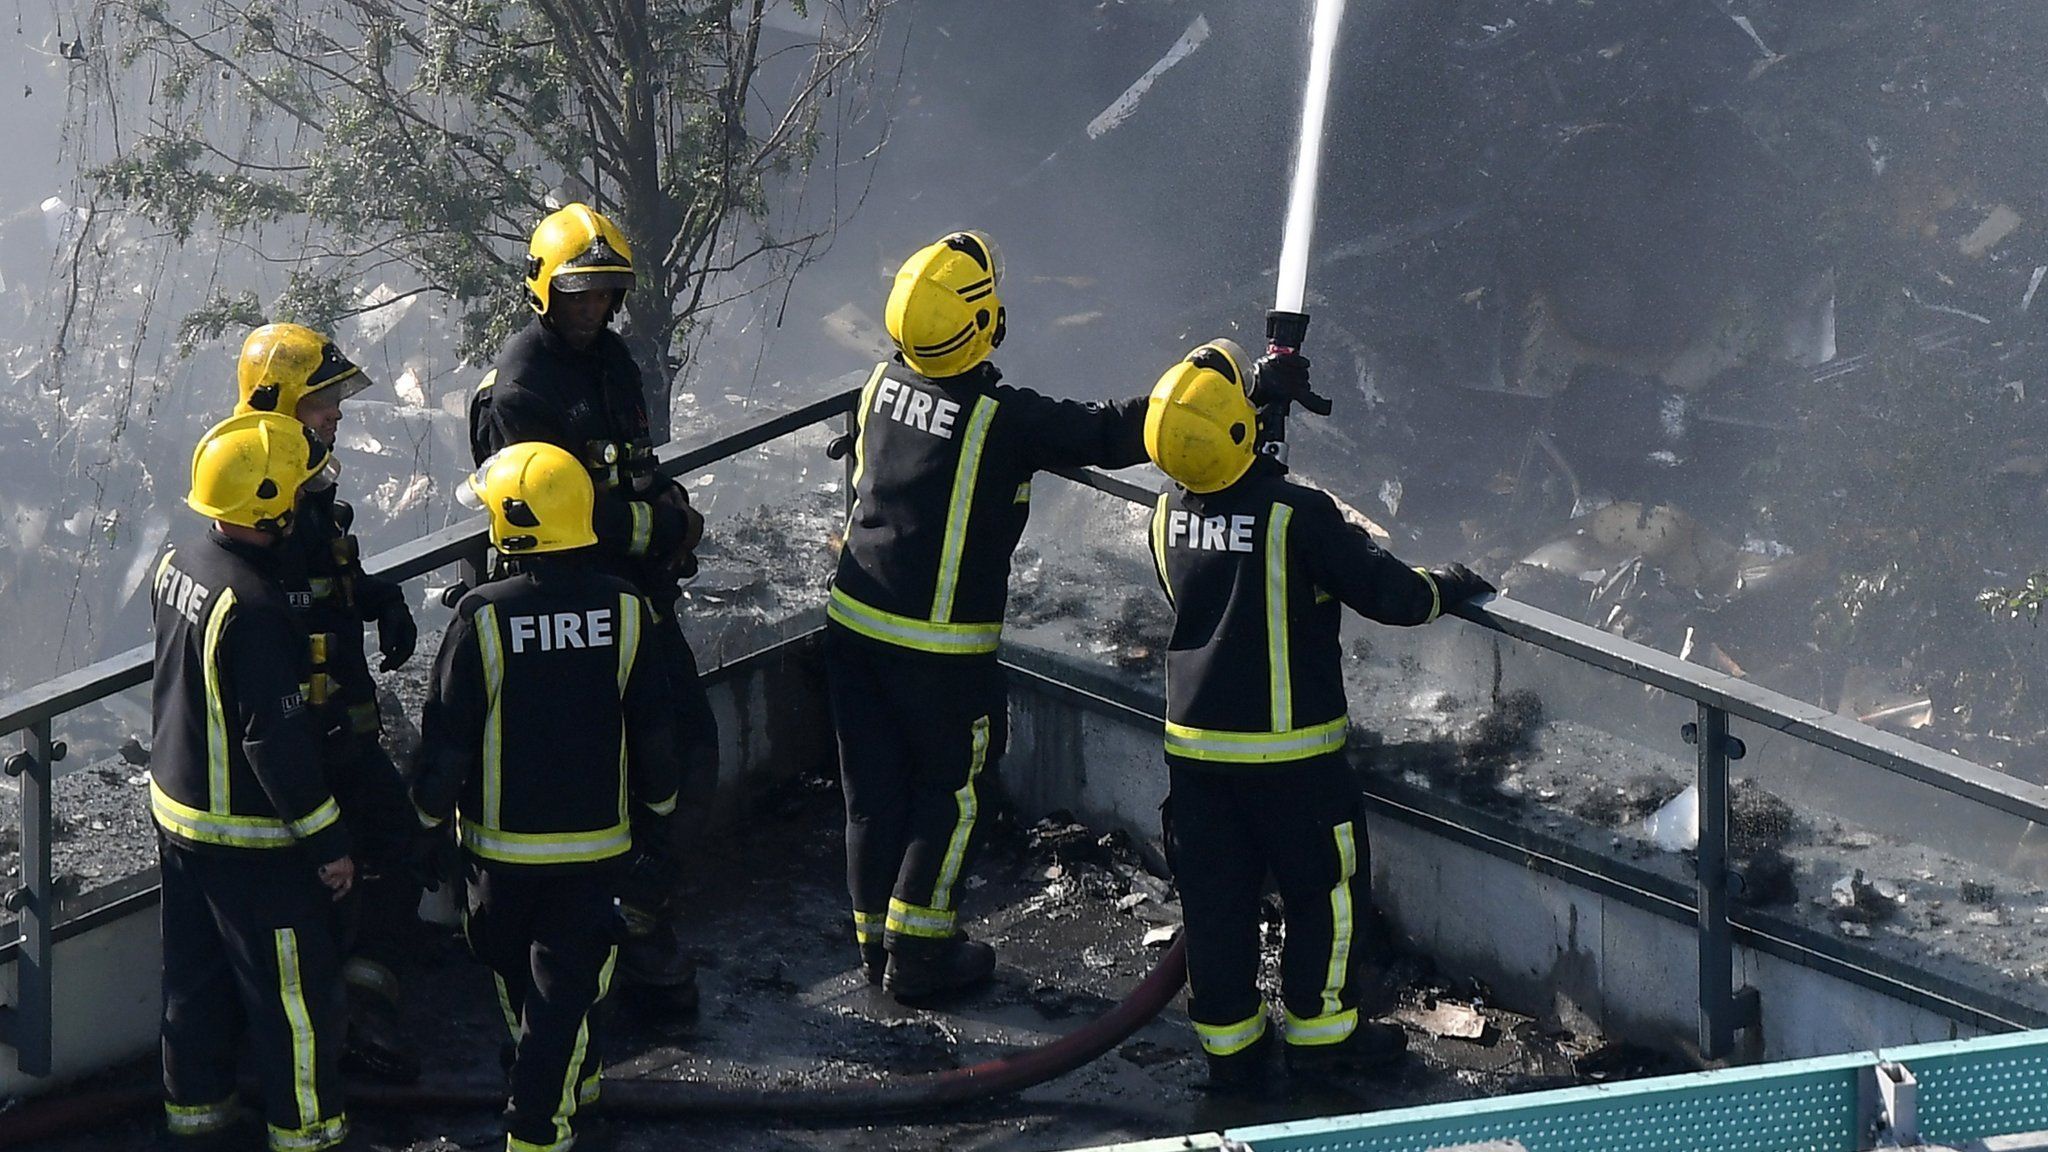 Fire crews at Grenfell Tower on 14 June 2017